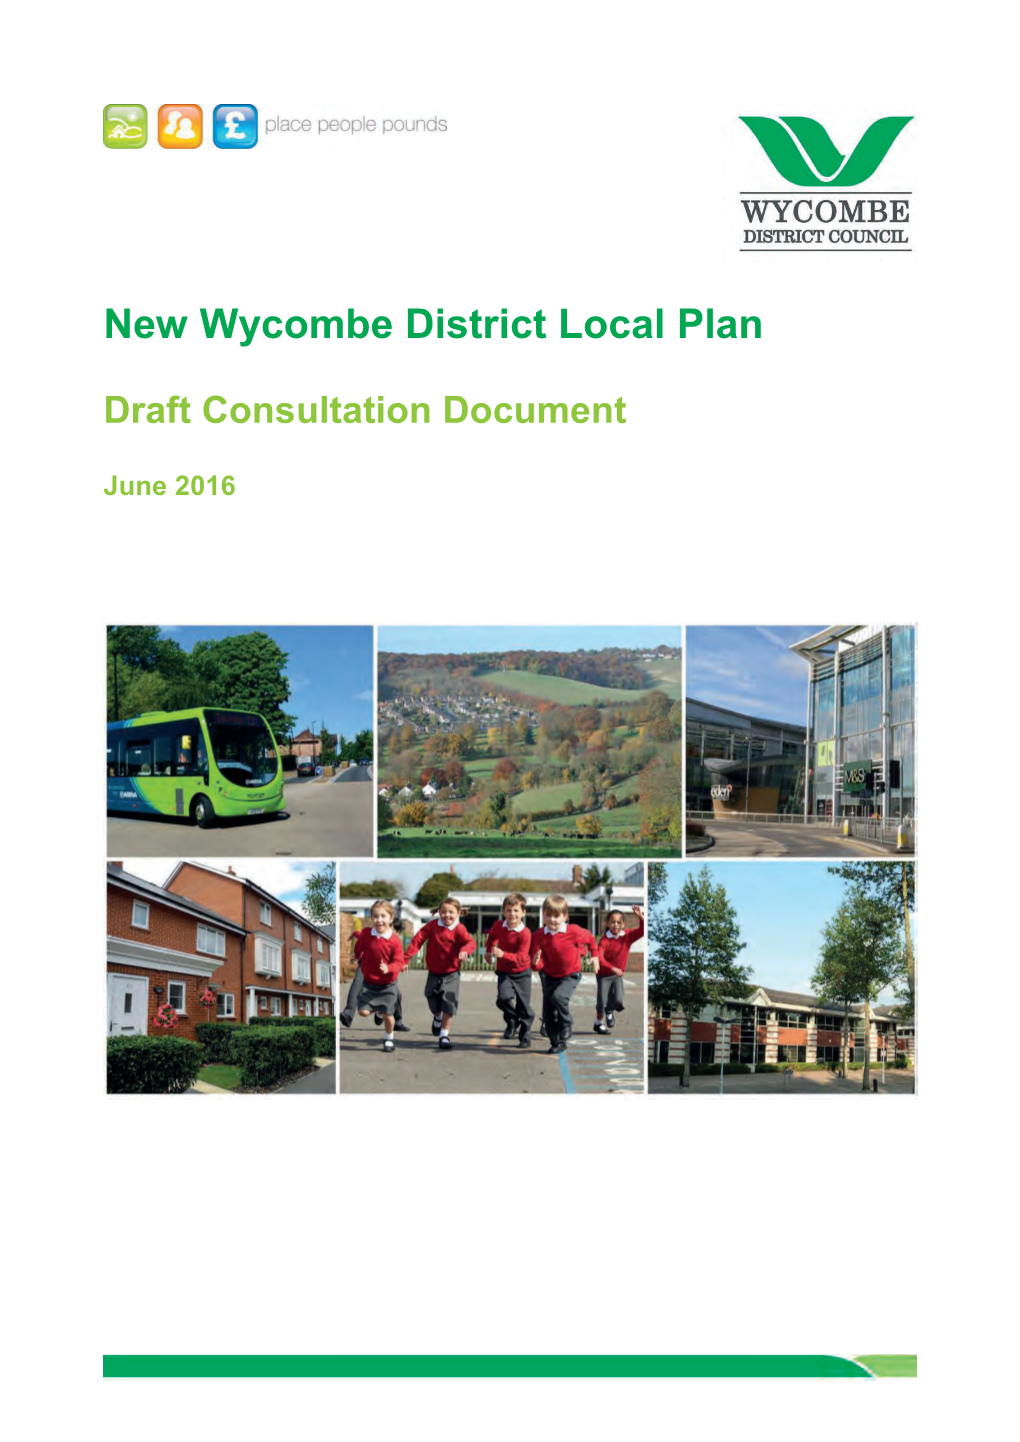 New Wycombe District Local Plan Draft Consultation Document